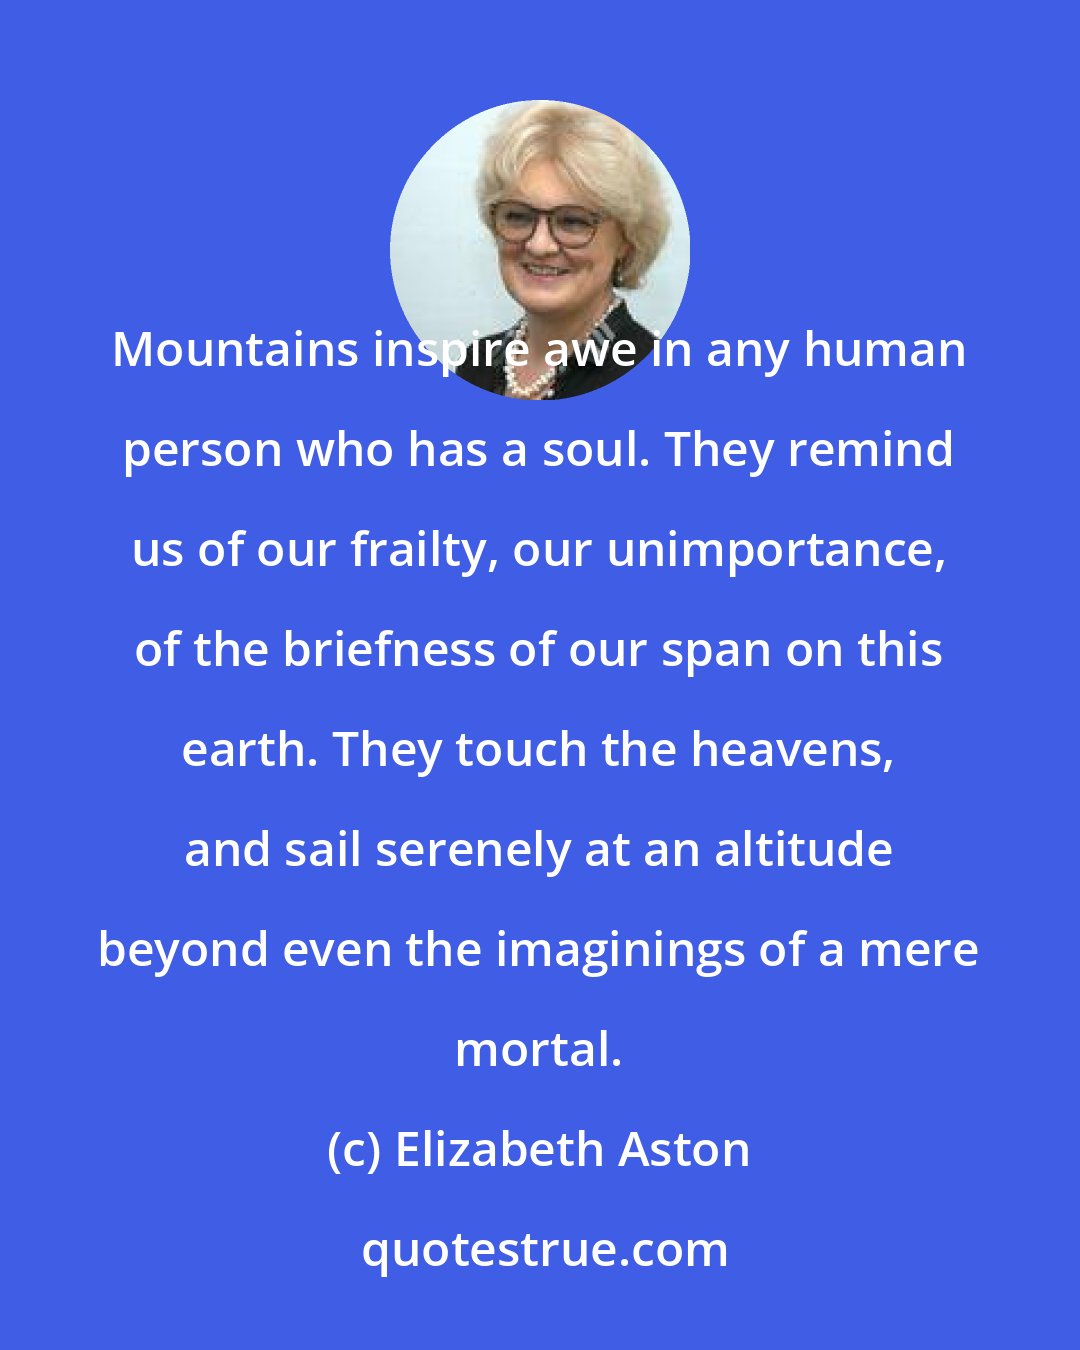 Elizabeth Aston: Mountains inspire awe in any human person who has a soul. They remind us of our frailty, our unimportance, of the briefness of our span on this earth. They touch the heavens, and sail serenely at an altitude beyond even the imaginings of a mere mortal.